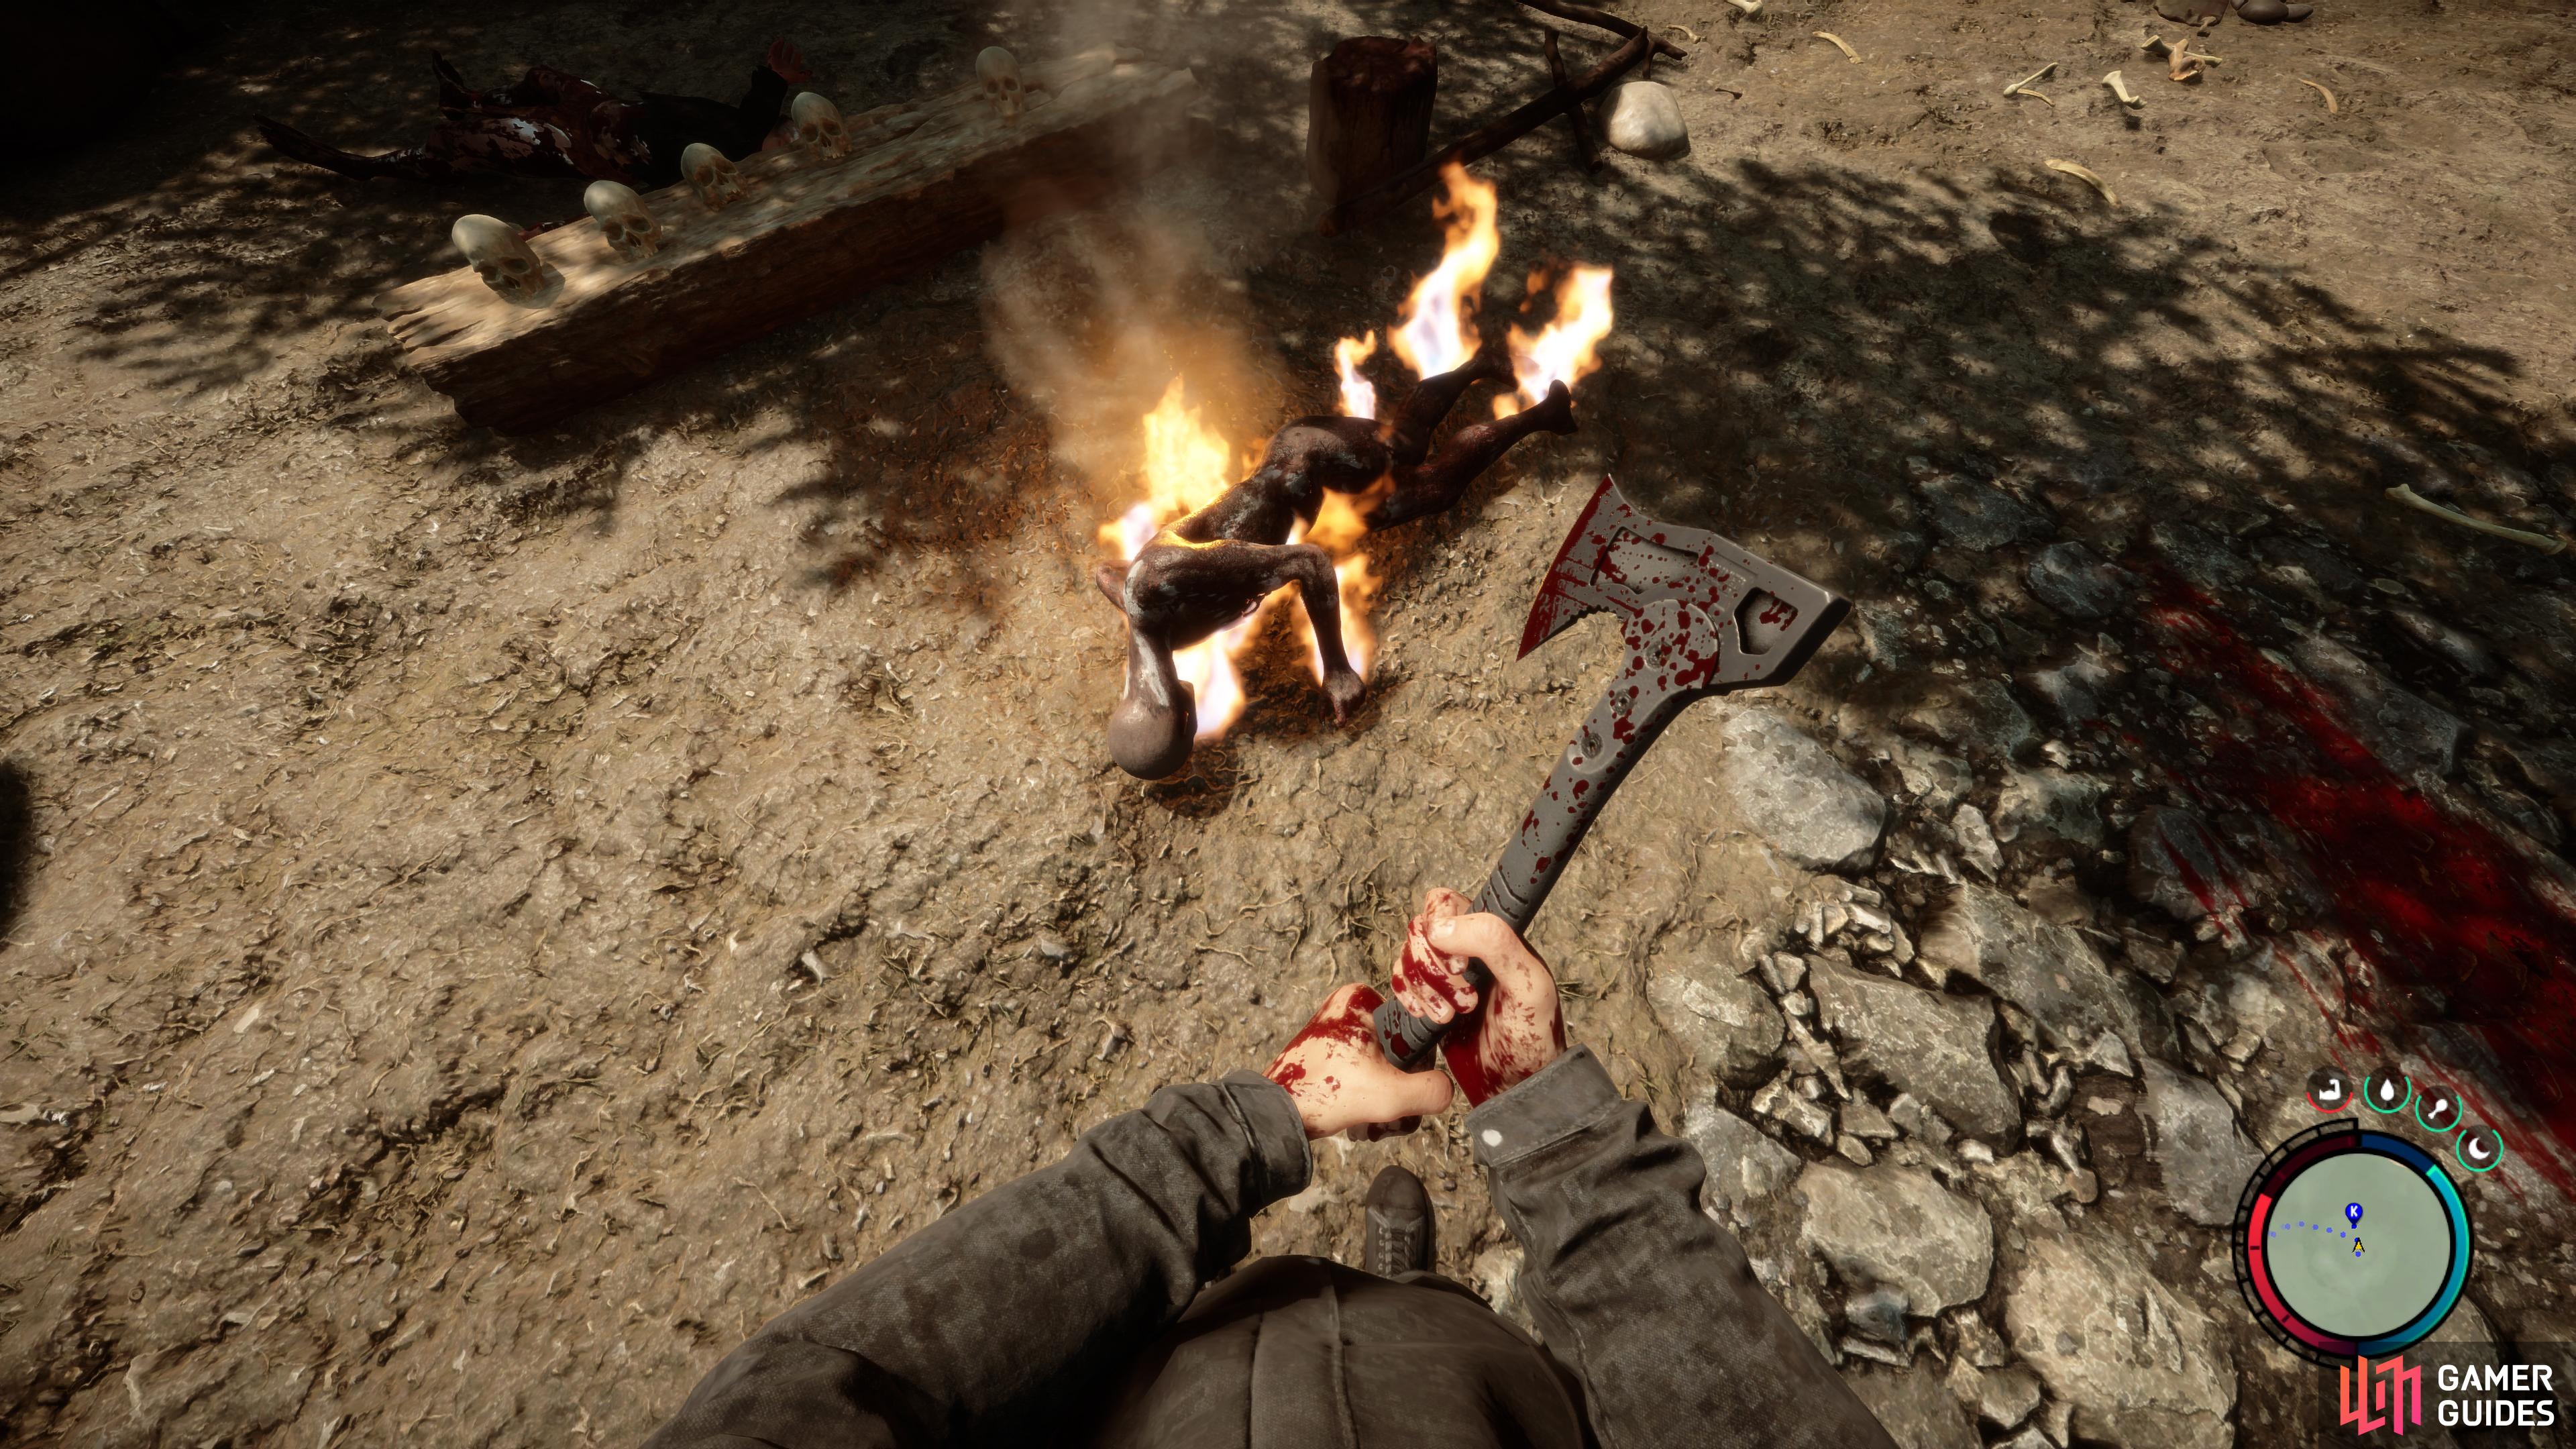 You can get bones by burning corpses on the campfire.